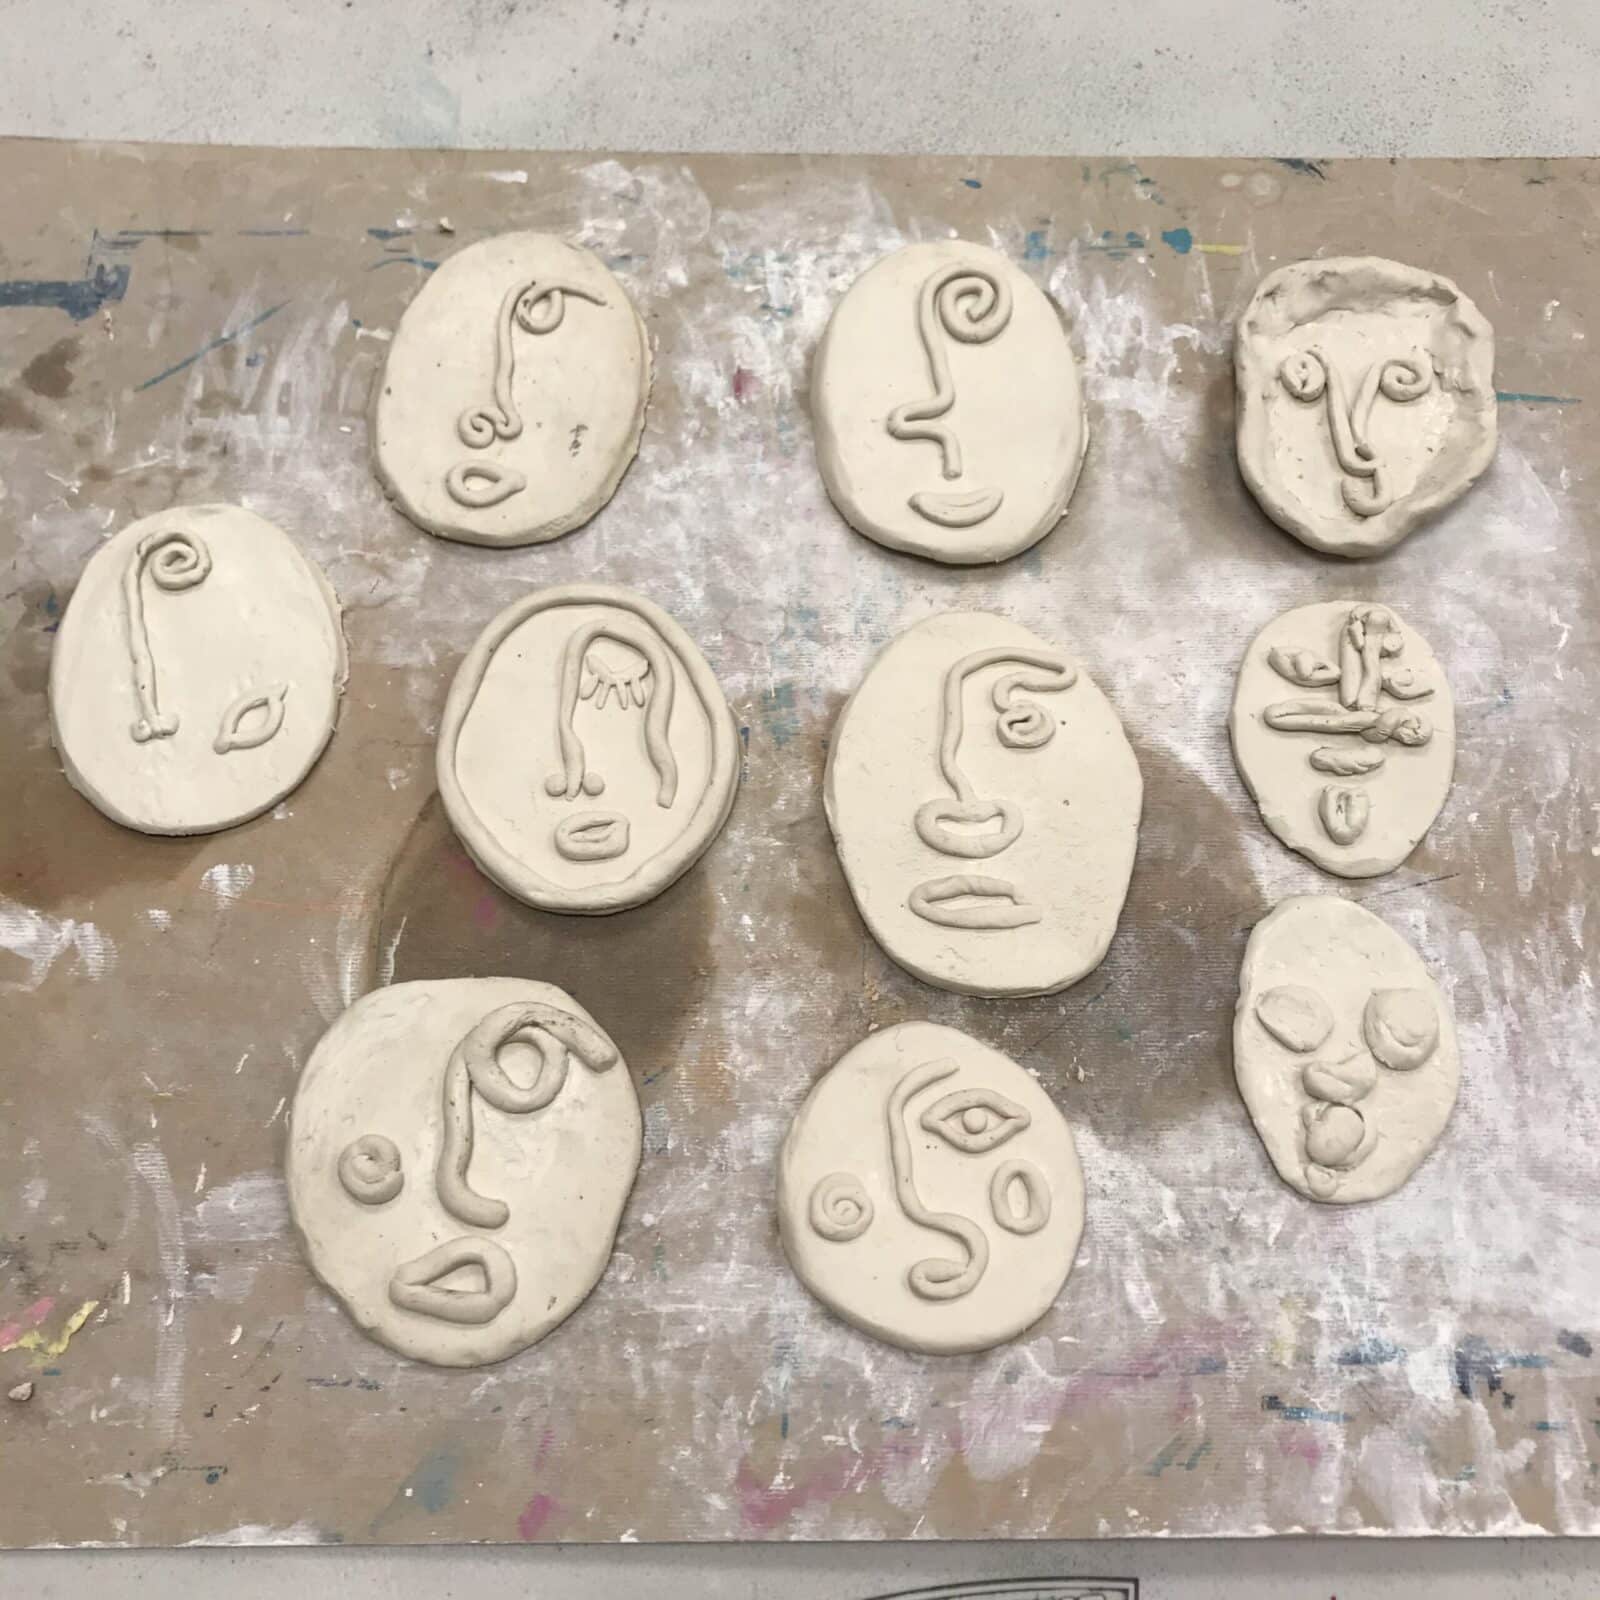 Different type of faces made from clay